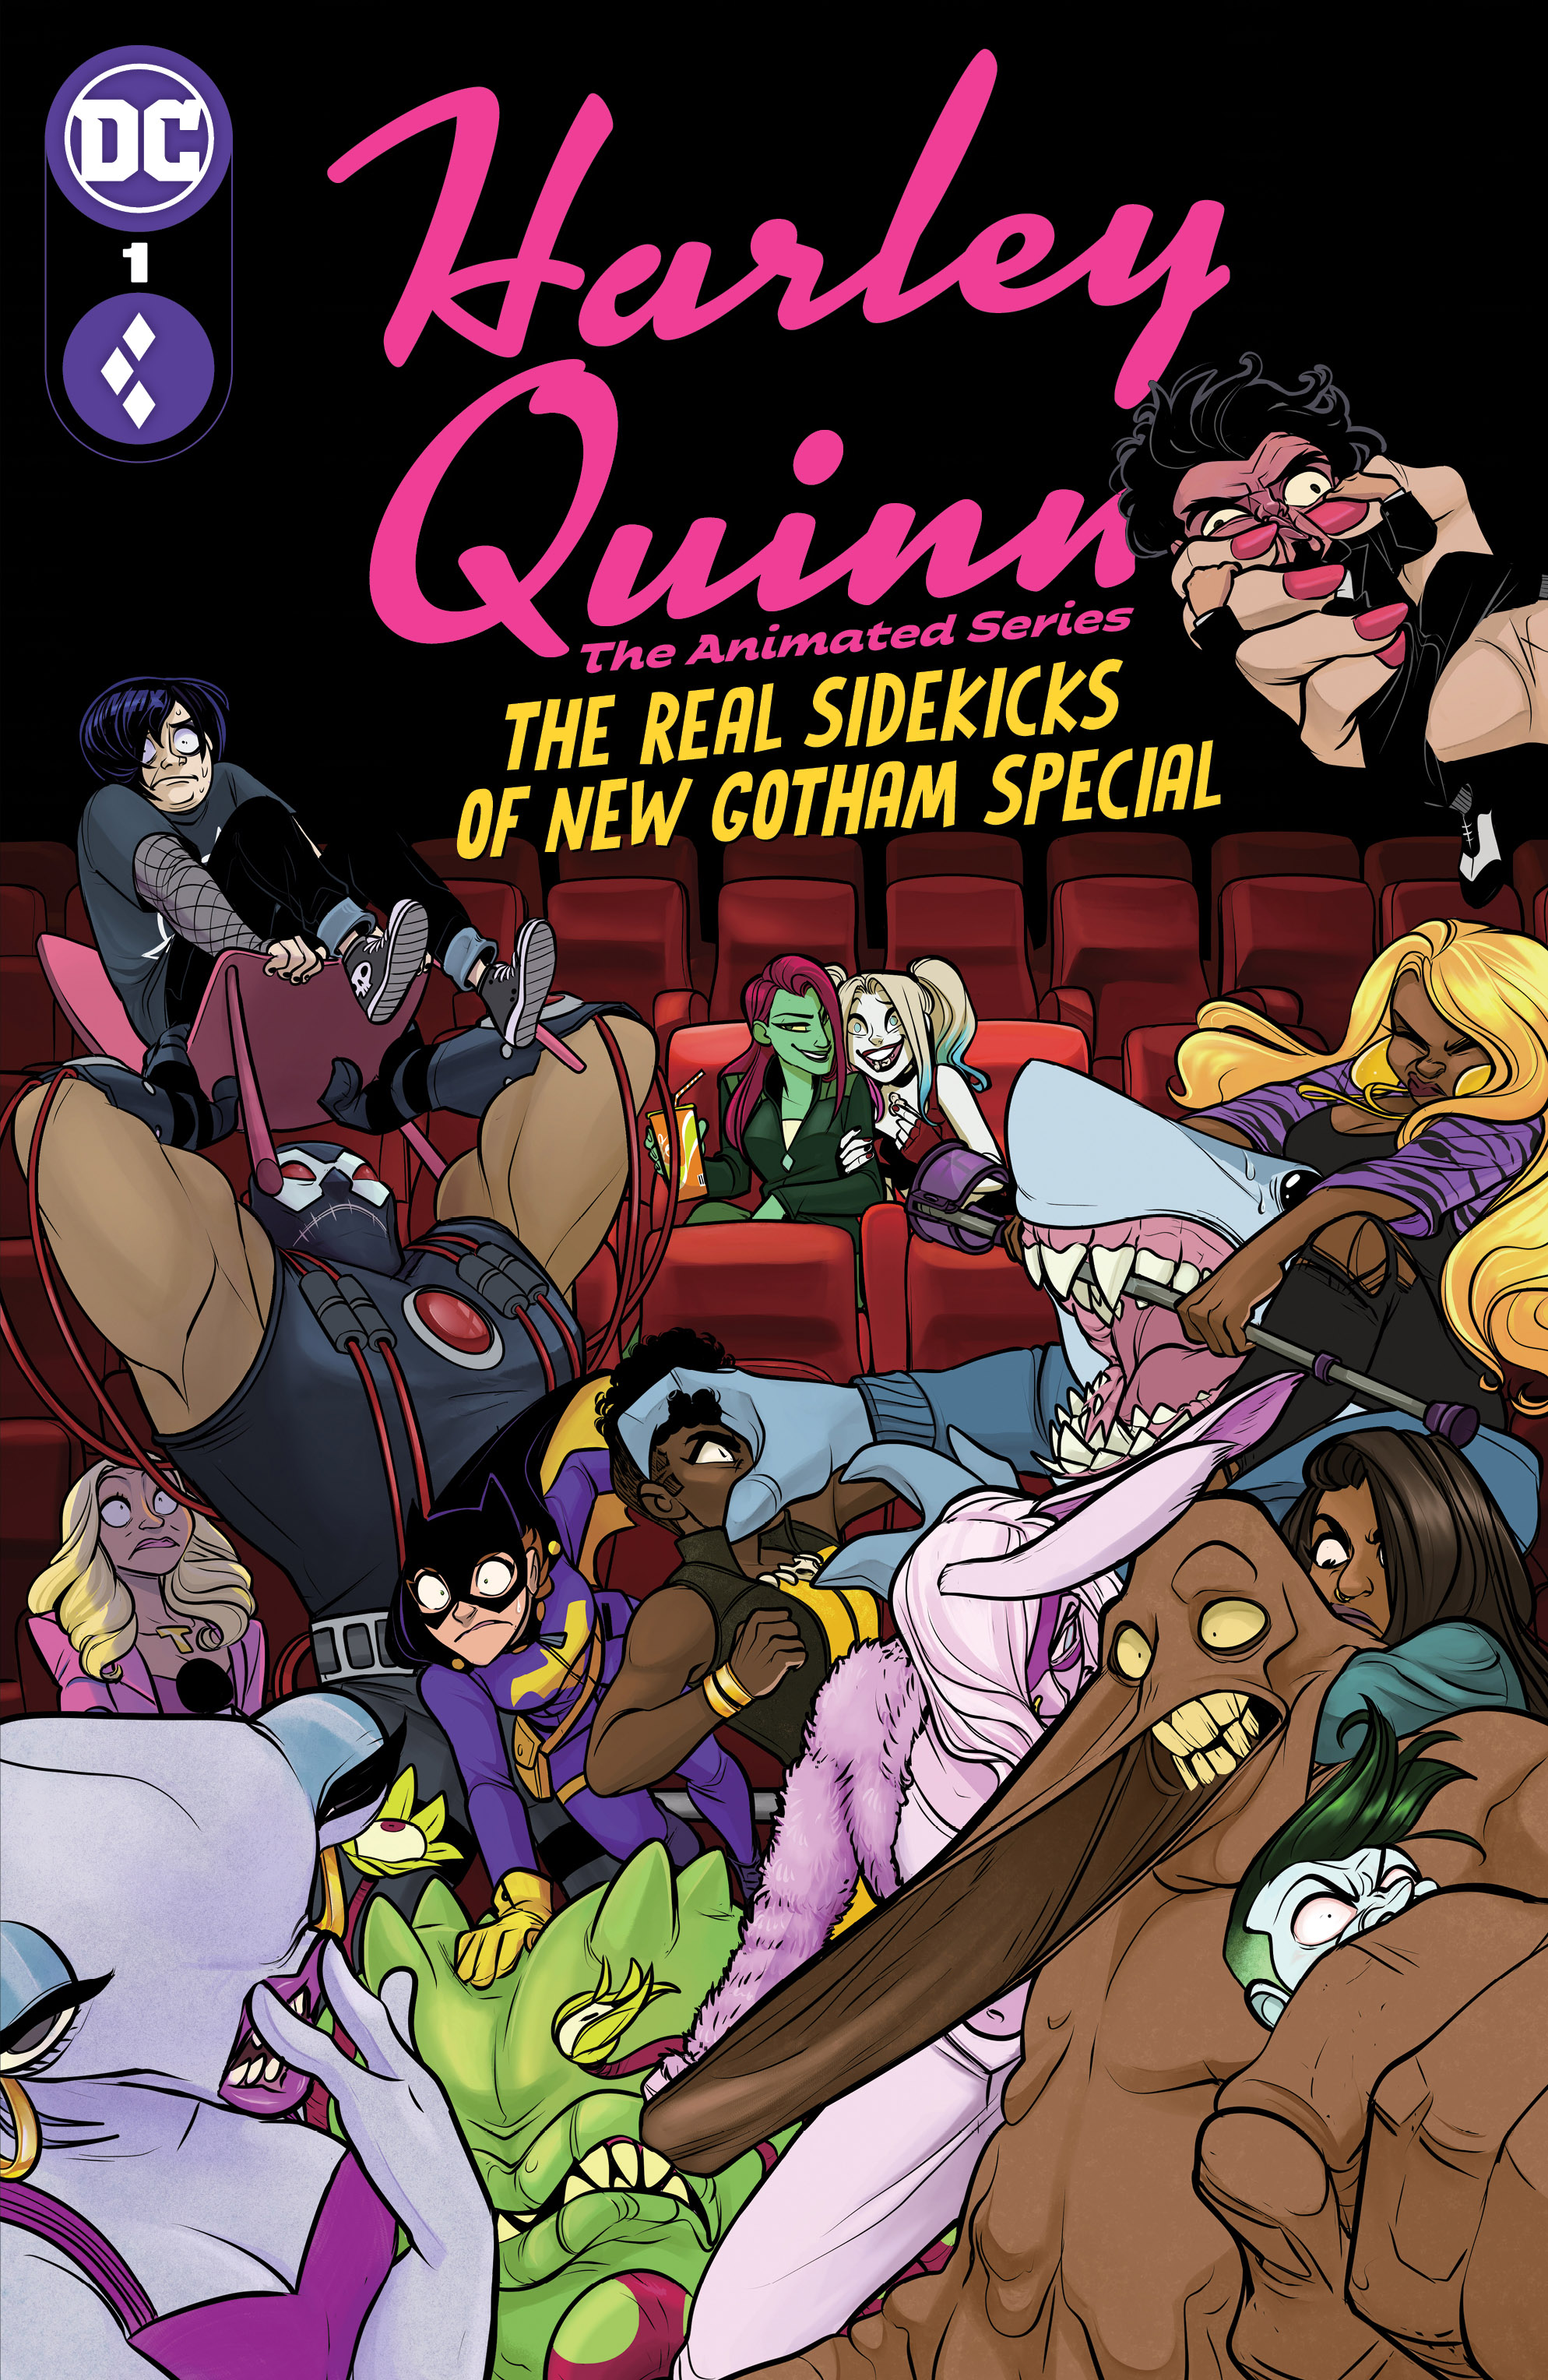 Harley Quinn The Animated Series The Real Sidekicks of New Gotham Special  #1 (One-Shot) Cover A Max